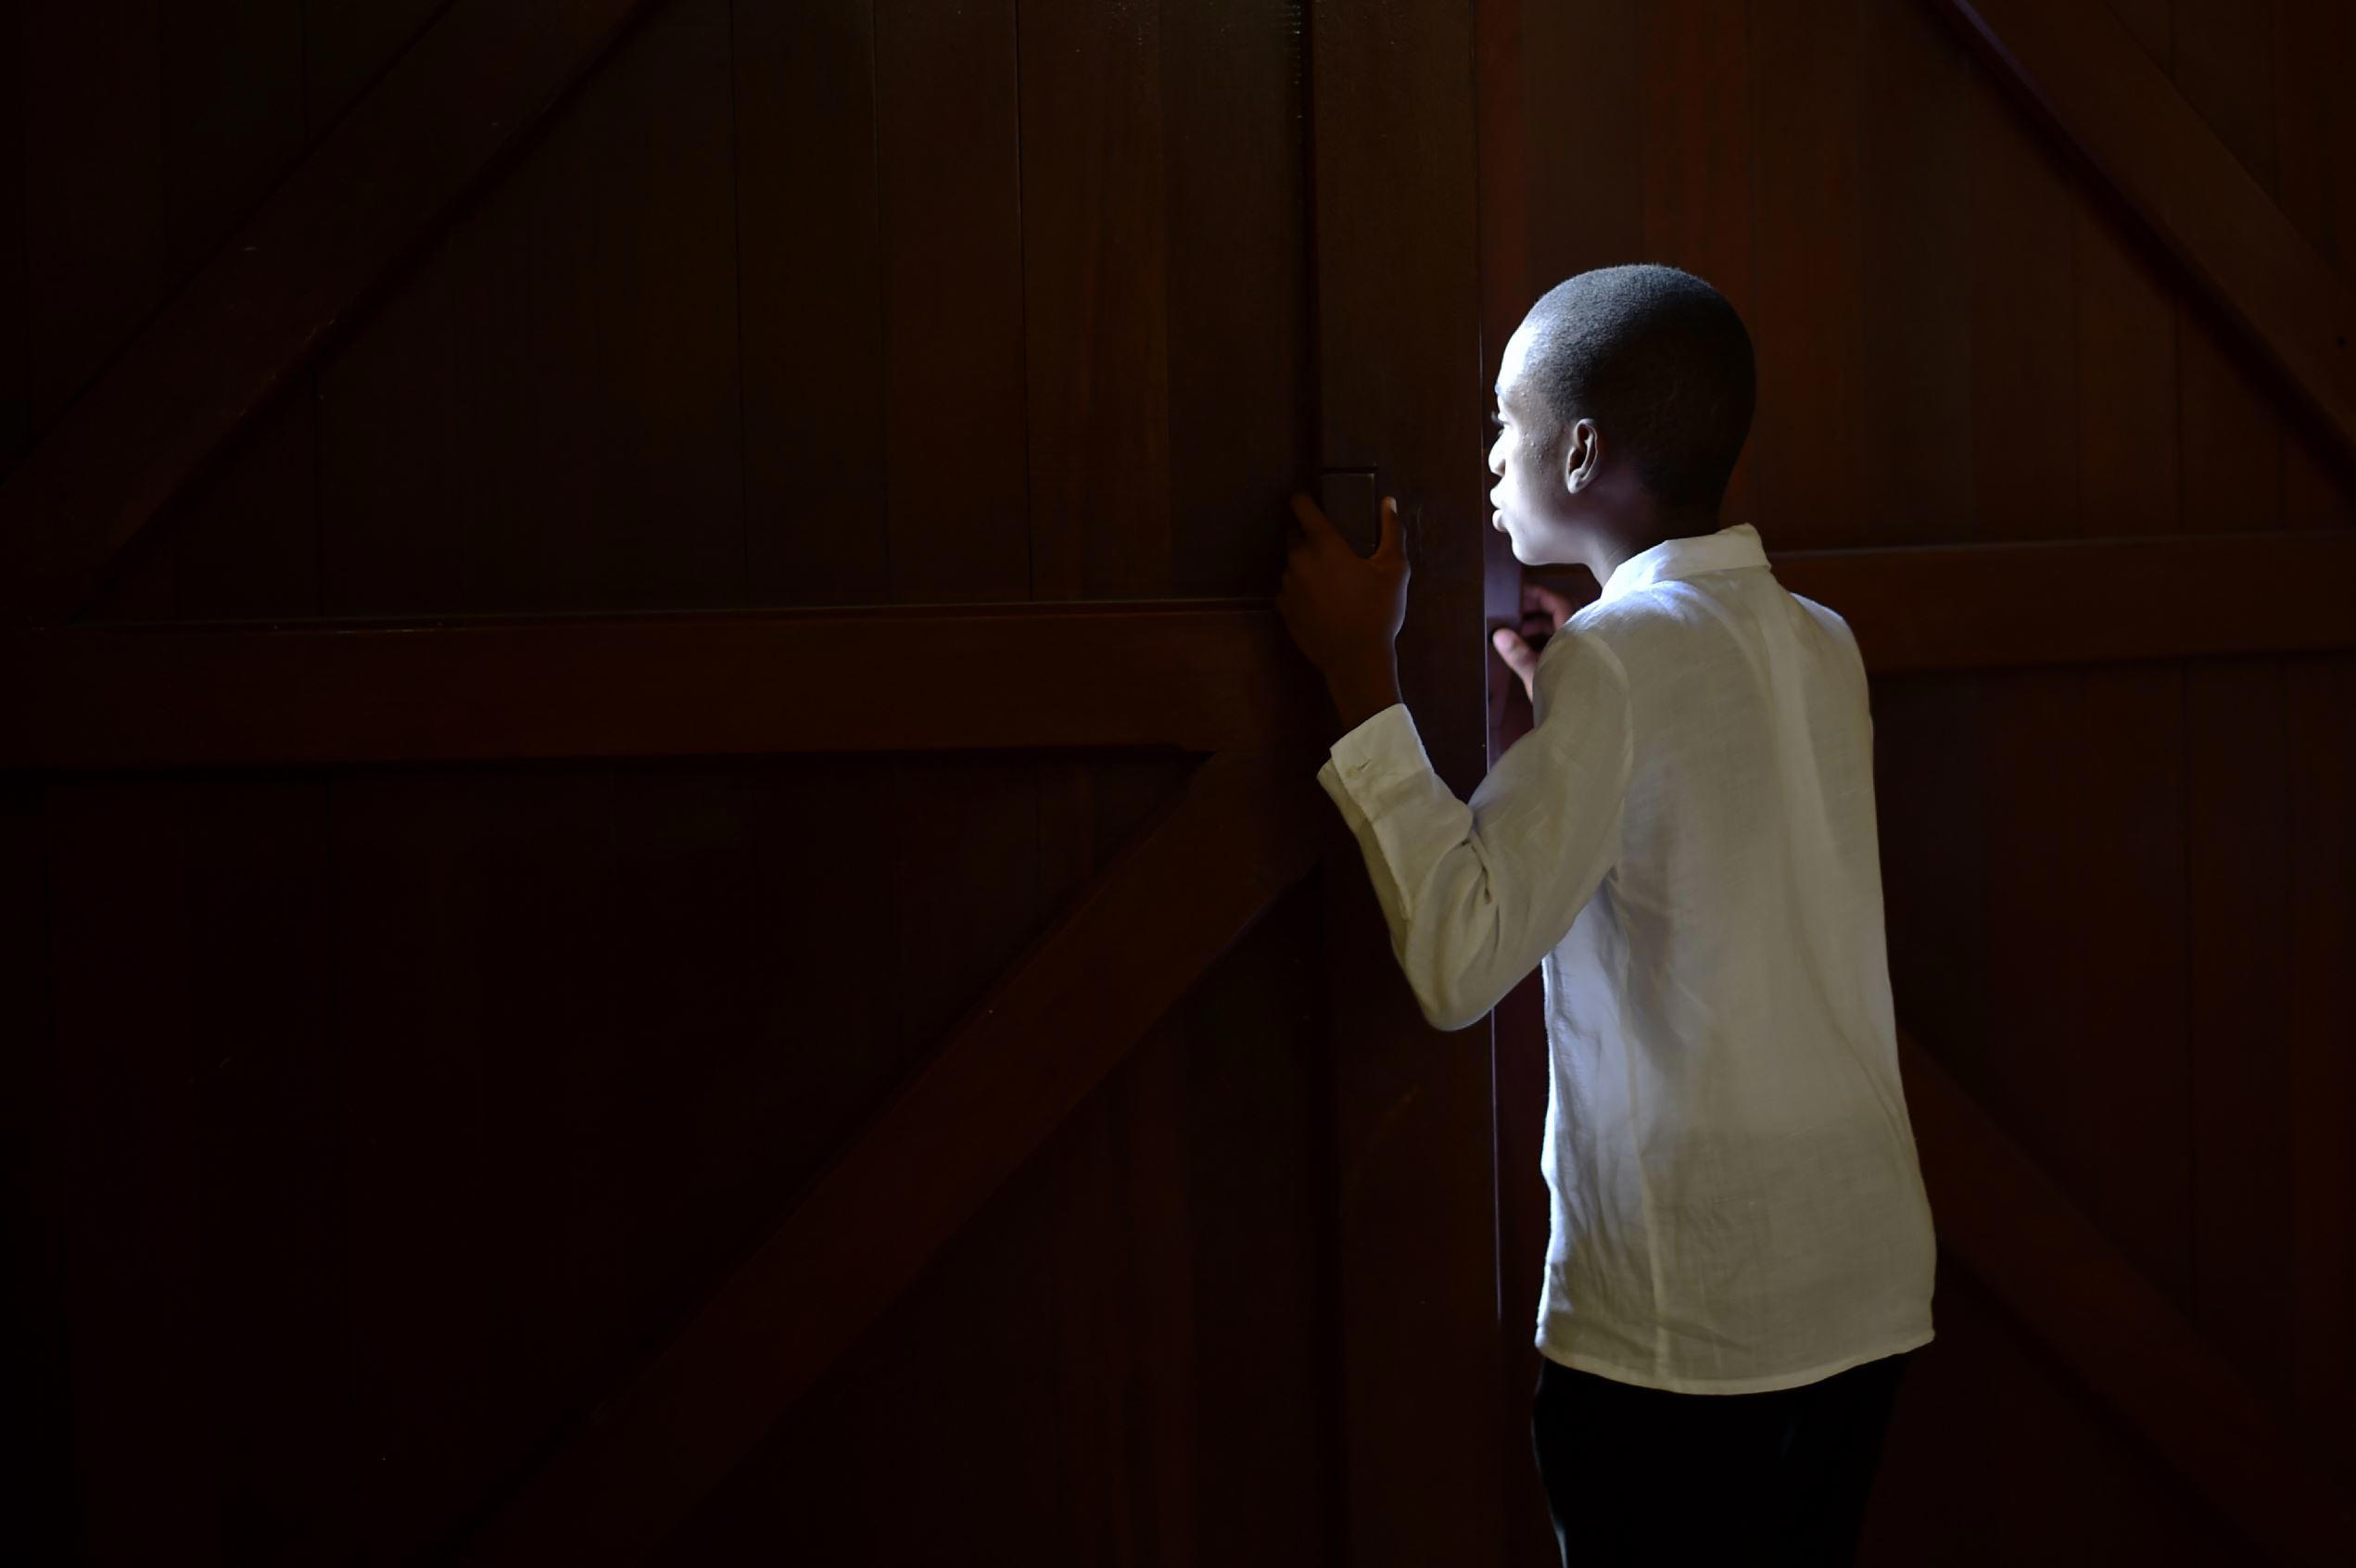 Slide 1 of 100: TOPSHOT - A boy looks between the doors of the St. Pierre Church, in the commune of Petion Ville, Port-au-Prince, on June 15, 2017, while waiting for the arrival of catholic faithful participating in a Precession of the Feast of God (Precession de la Fete Dieu, in French) to mark the celebration of Corpus Christi. The faithful walked in procession to St. Pierre Church, in Petion Ville, where a mass was held. / AFP PHOTO / HECTOR RETAMAL (Photo credit should read HECTOR RETAMAL/AFP/Getty Images)